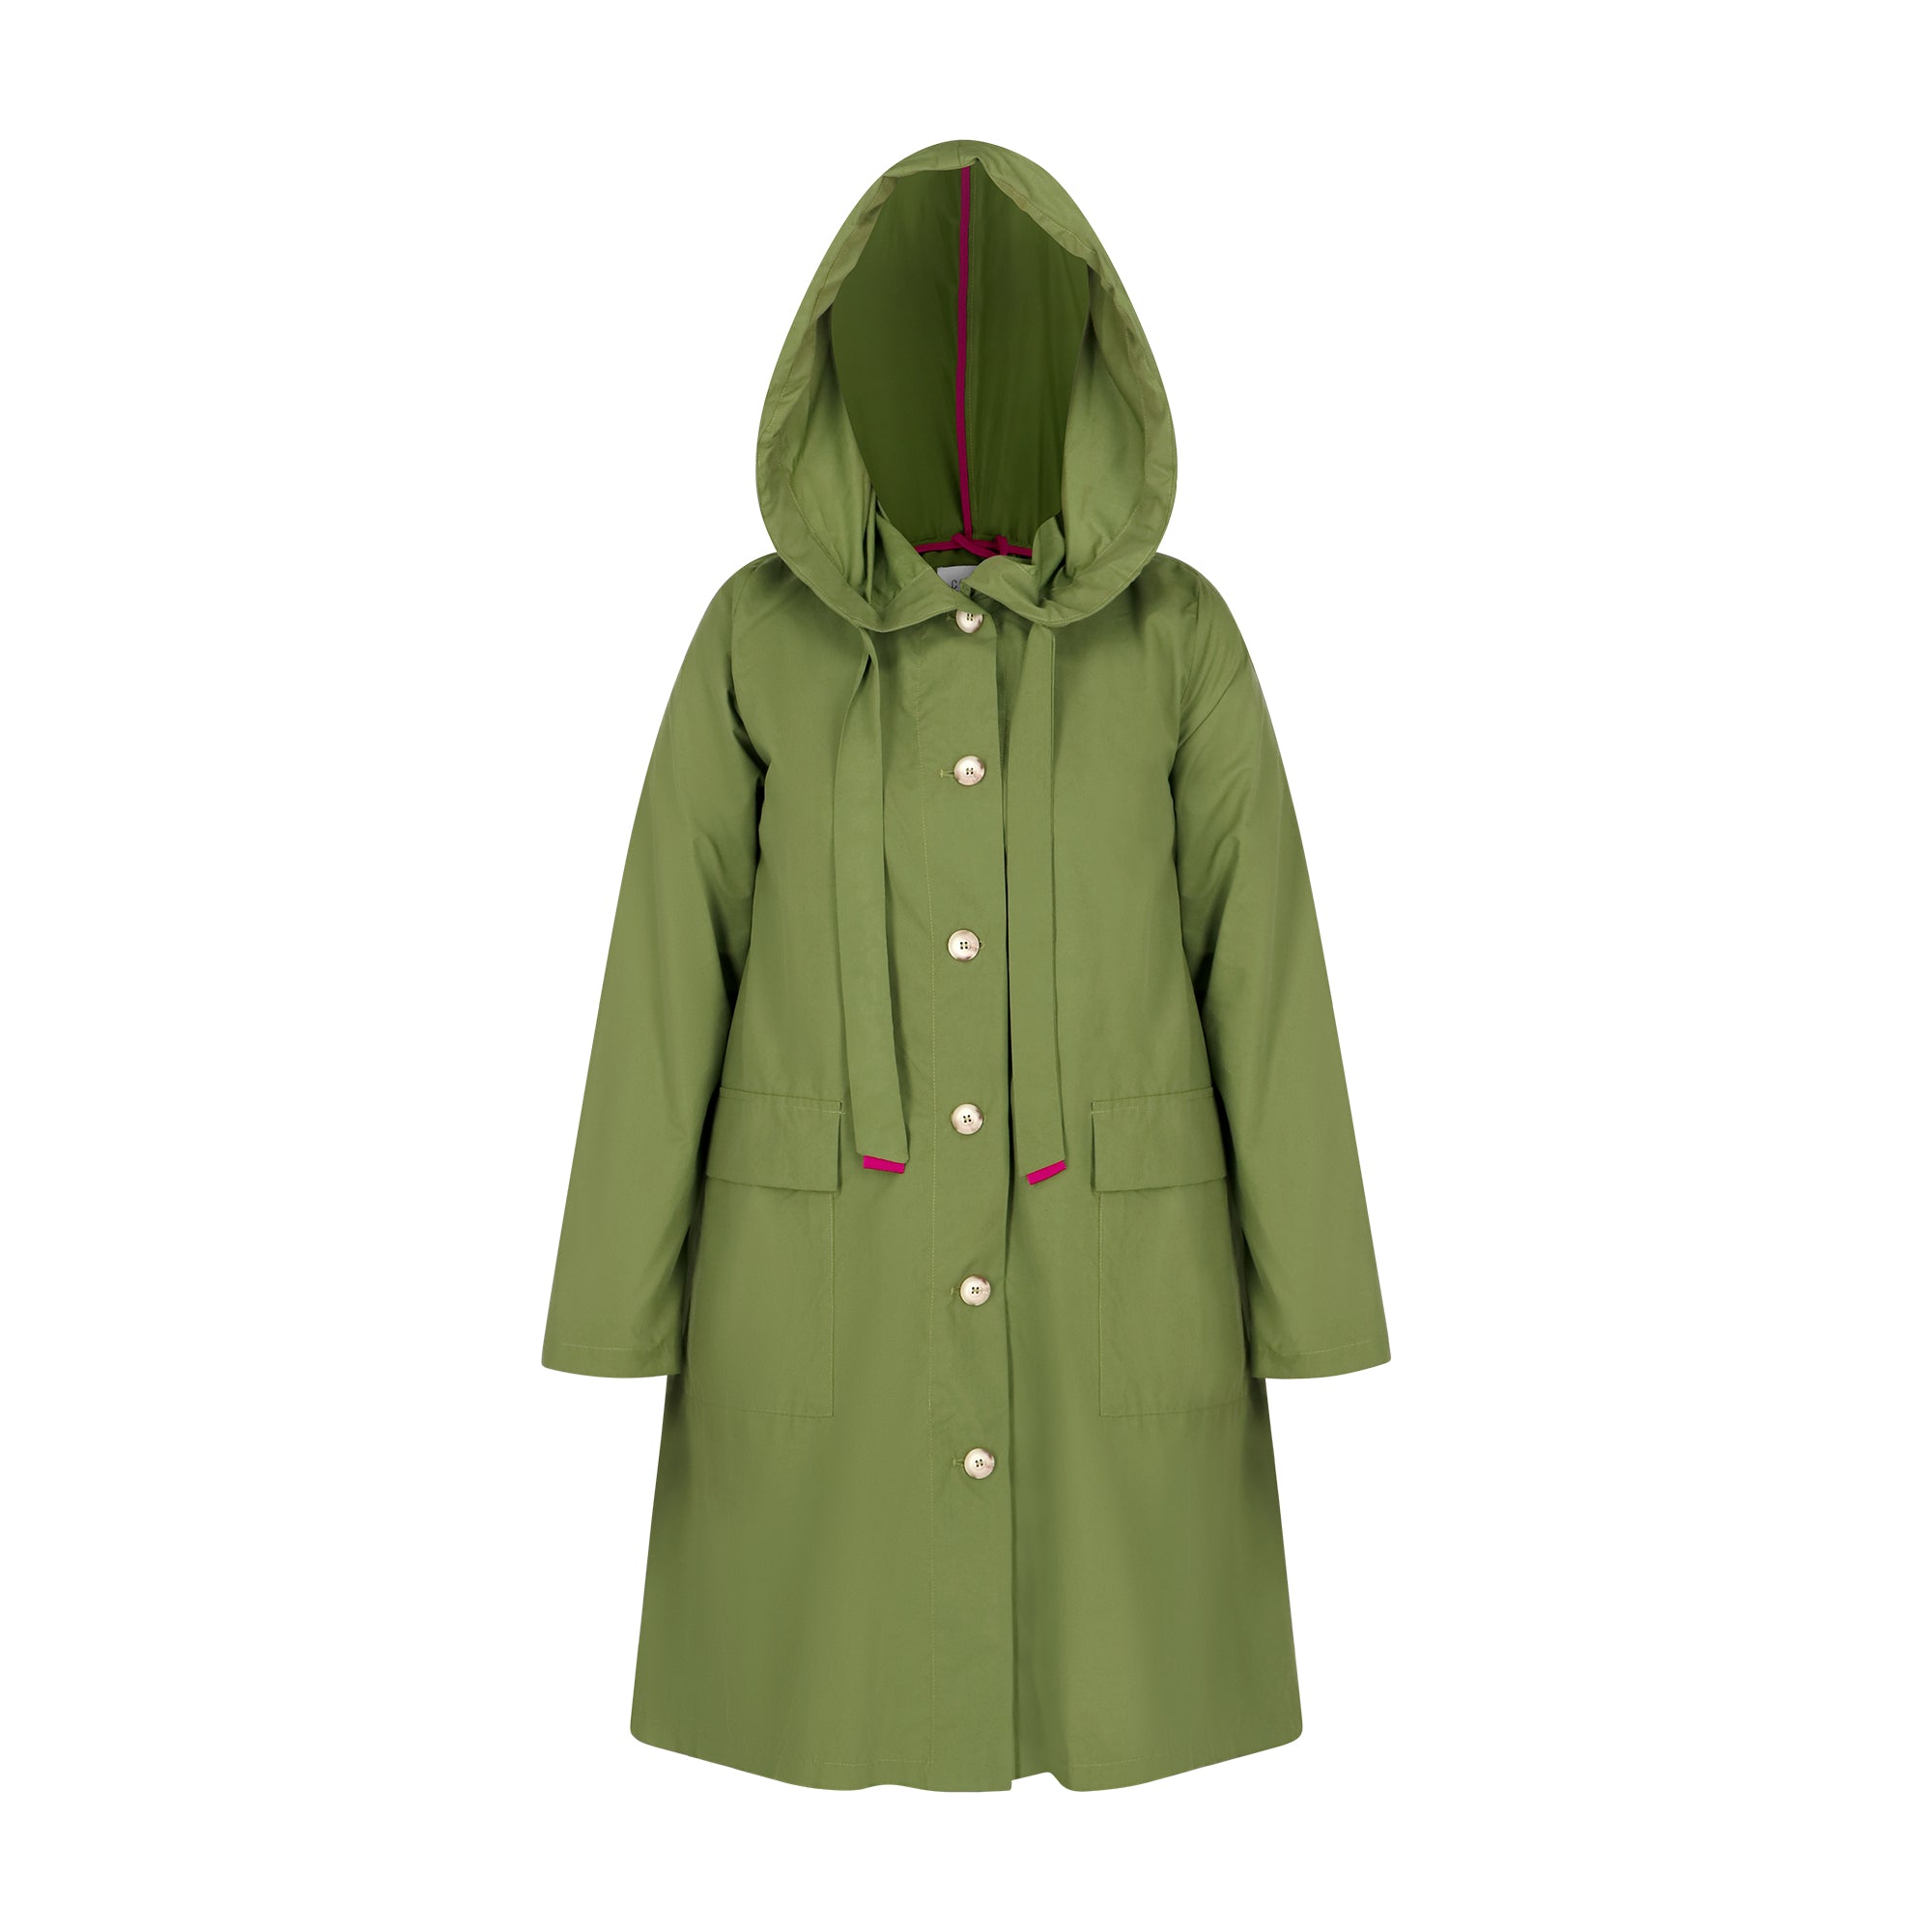 The classic raincoat - green color - front view